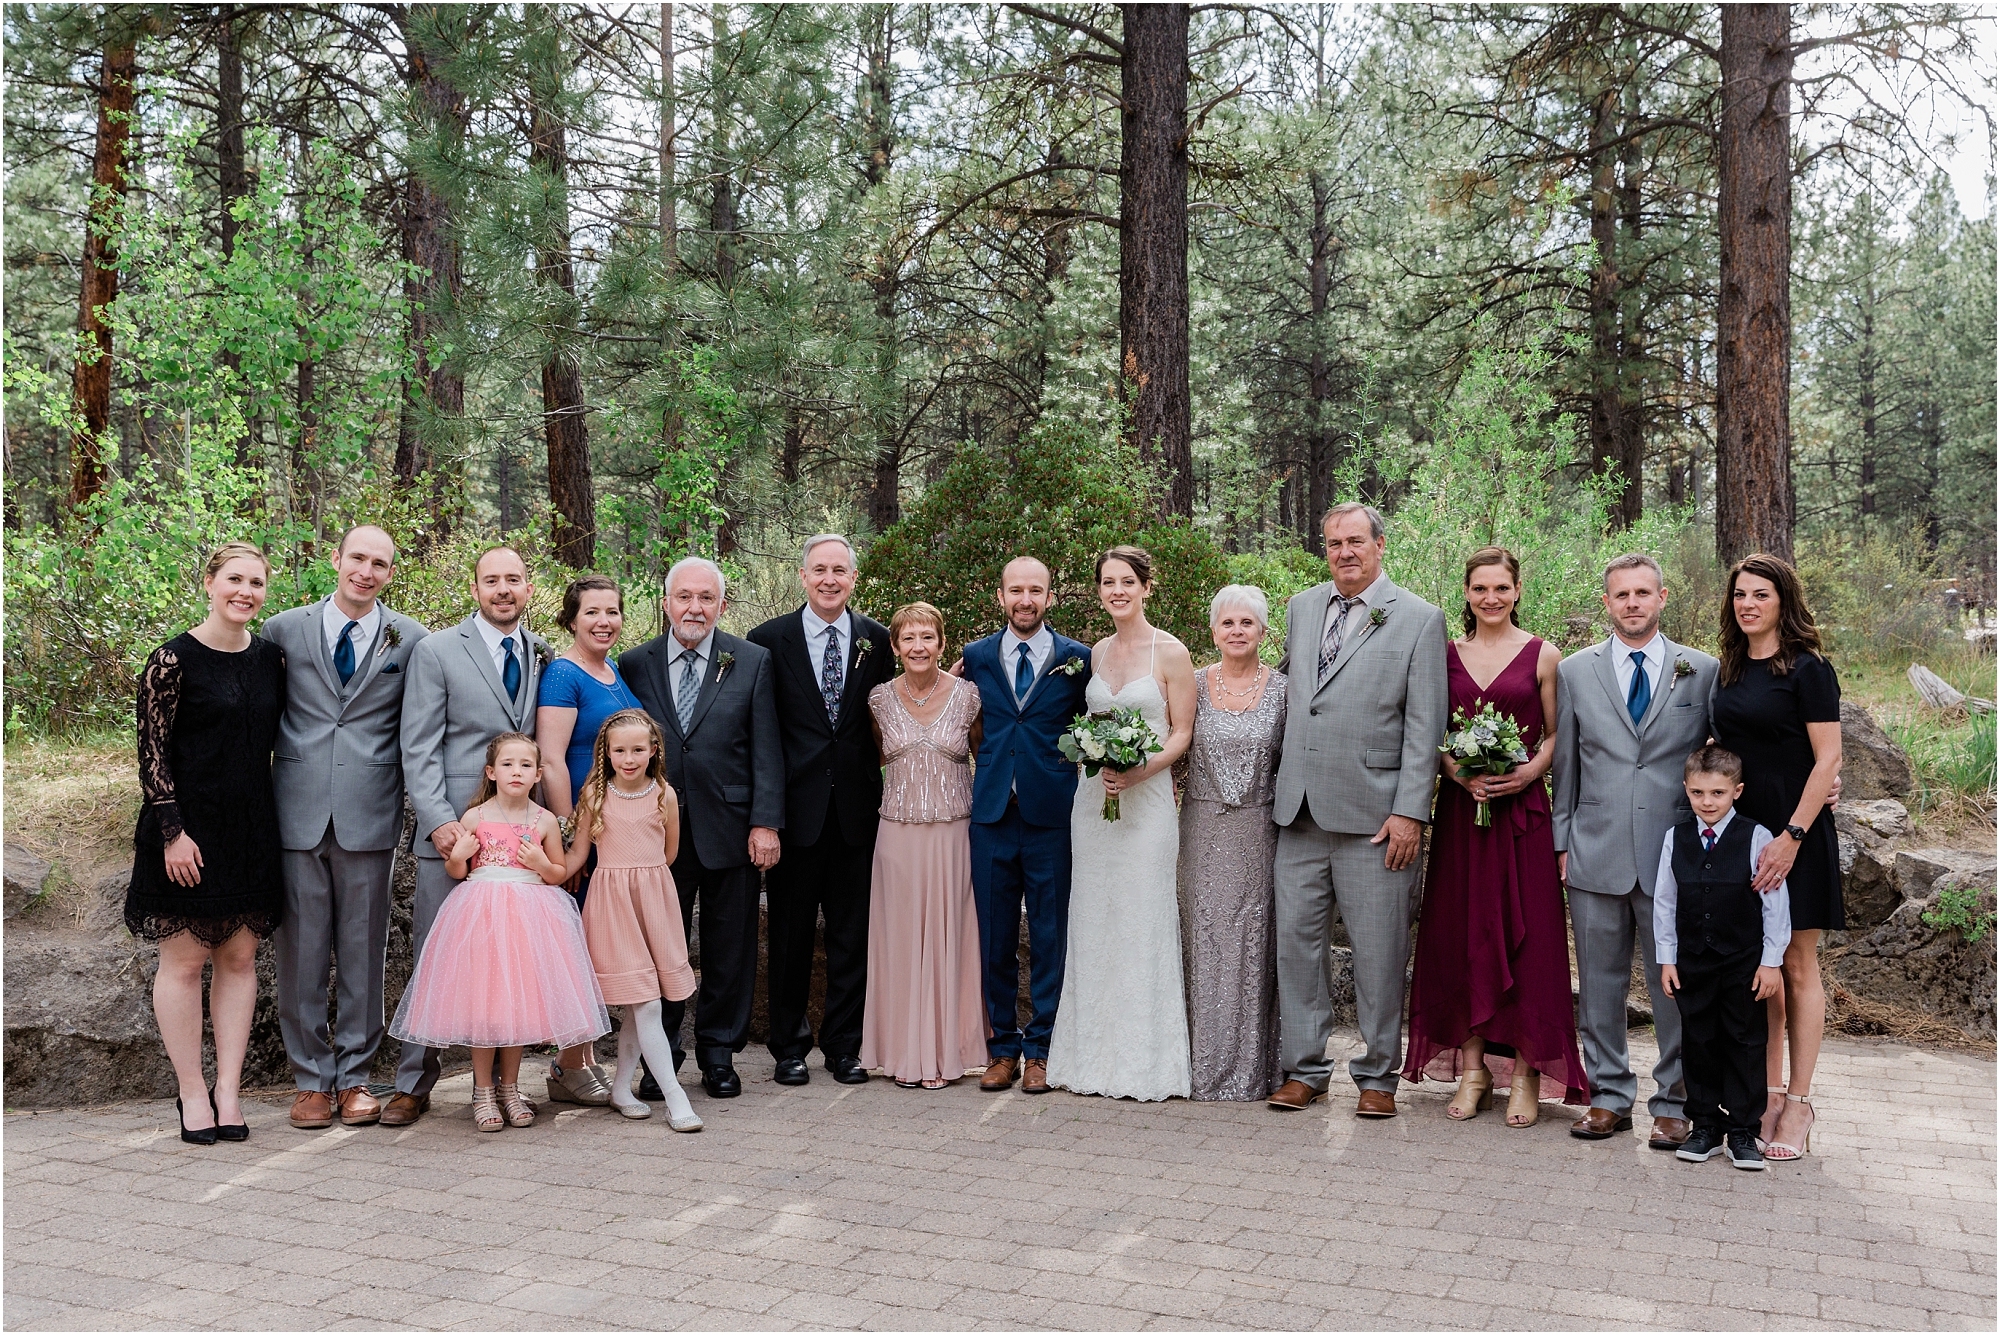 An extended family photo from a wedding at the High Desert Museum in Bend, OR. | Erica Swantek Photography